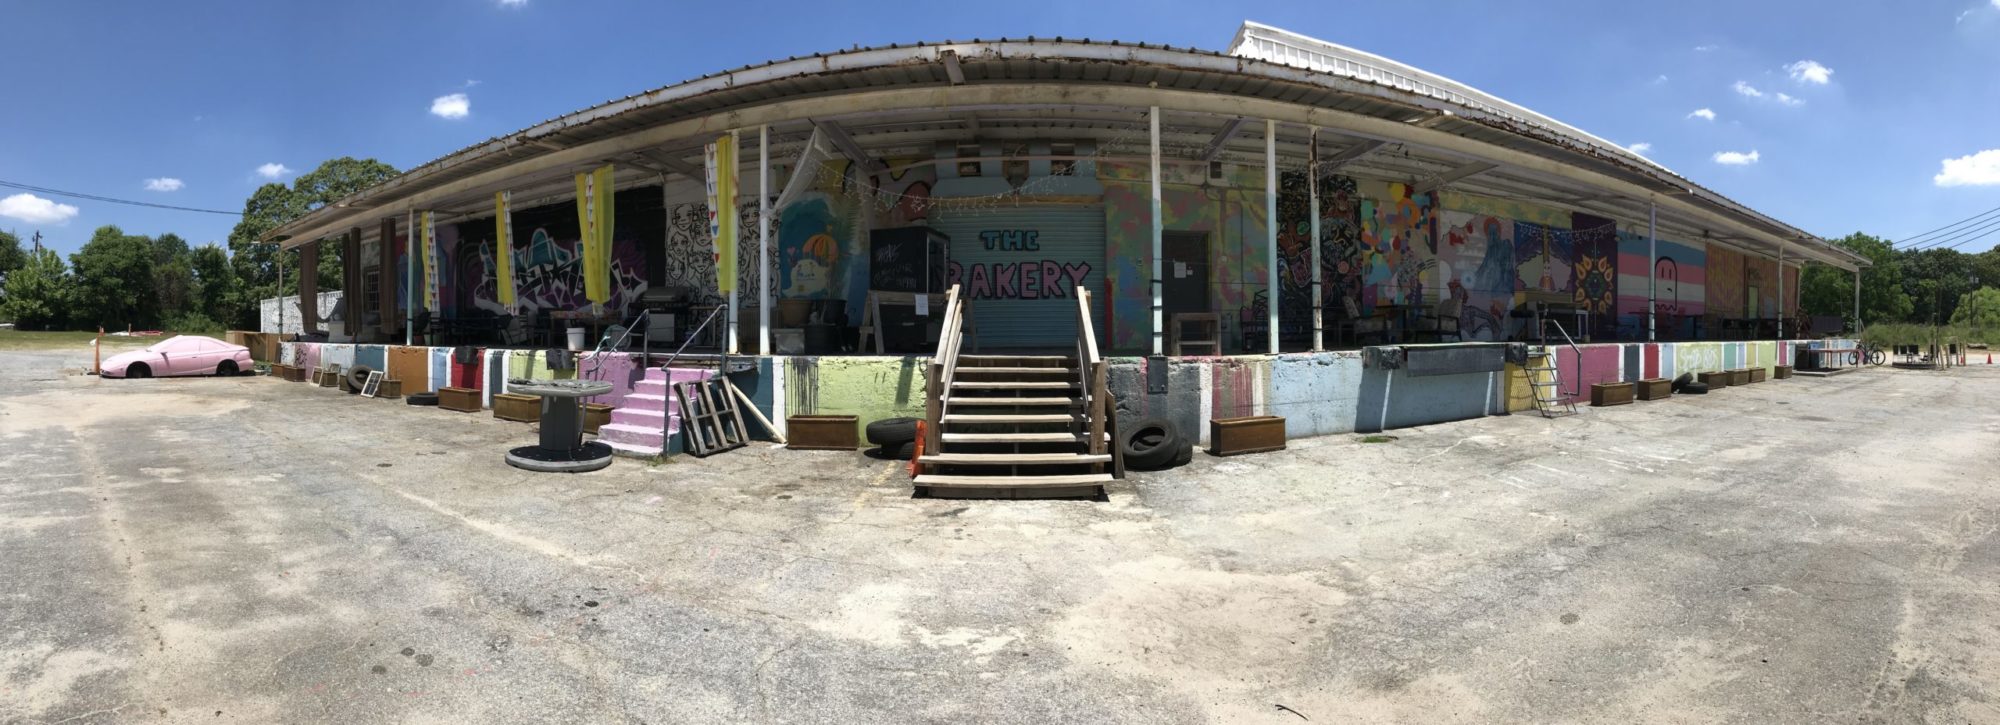 A panorama view of a building covered in colorful graffiti.